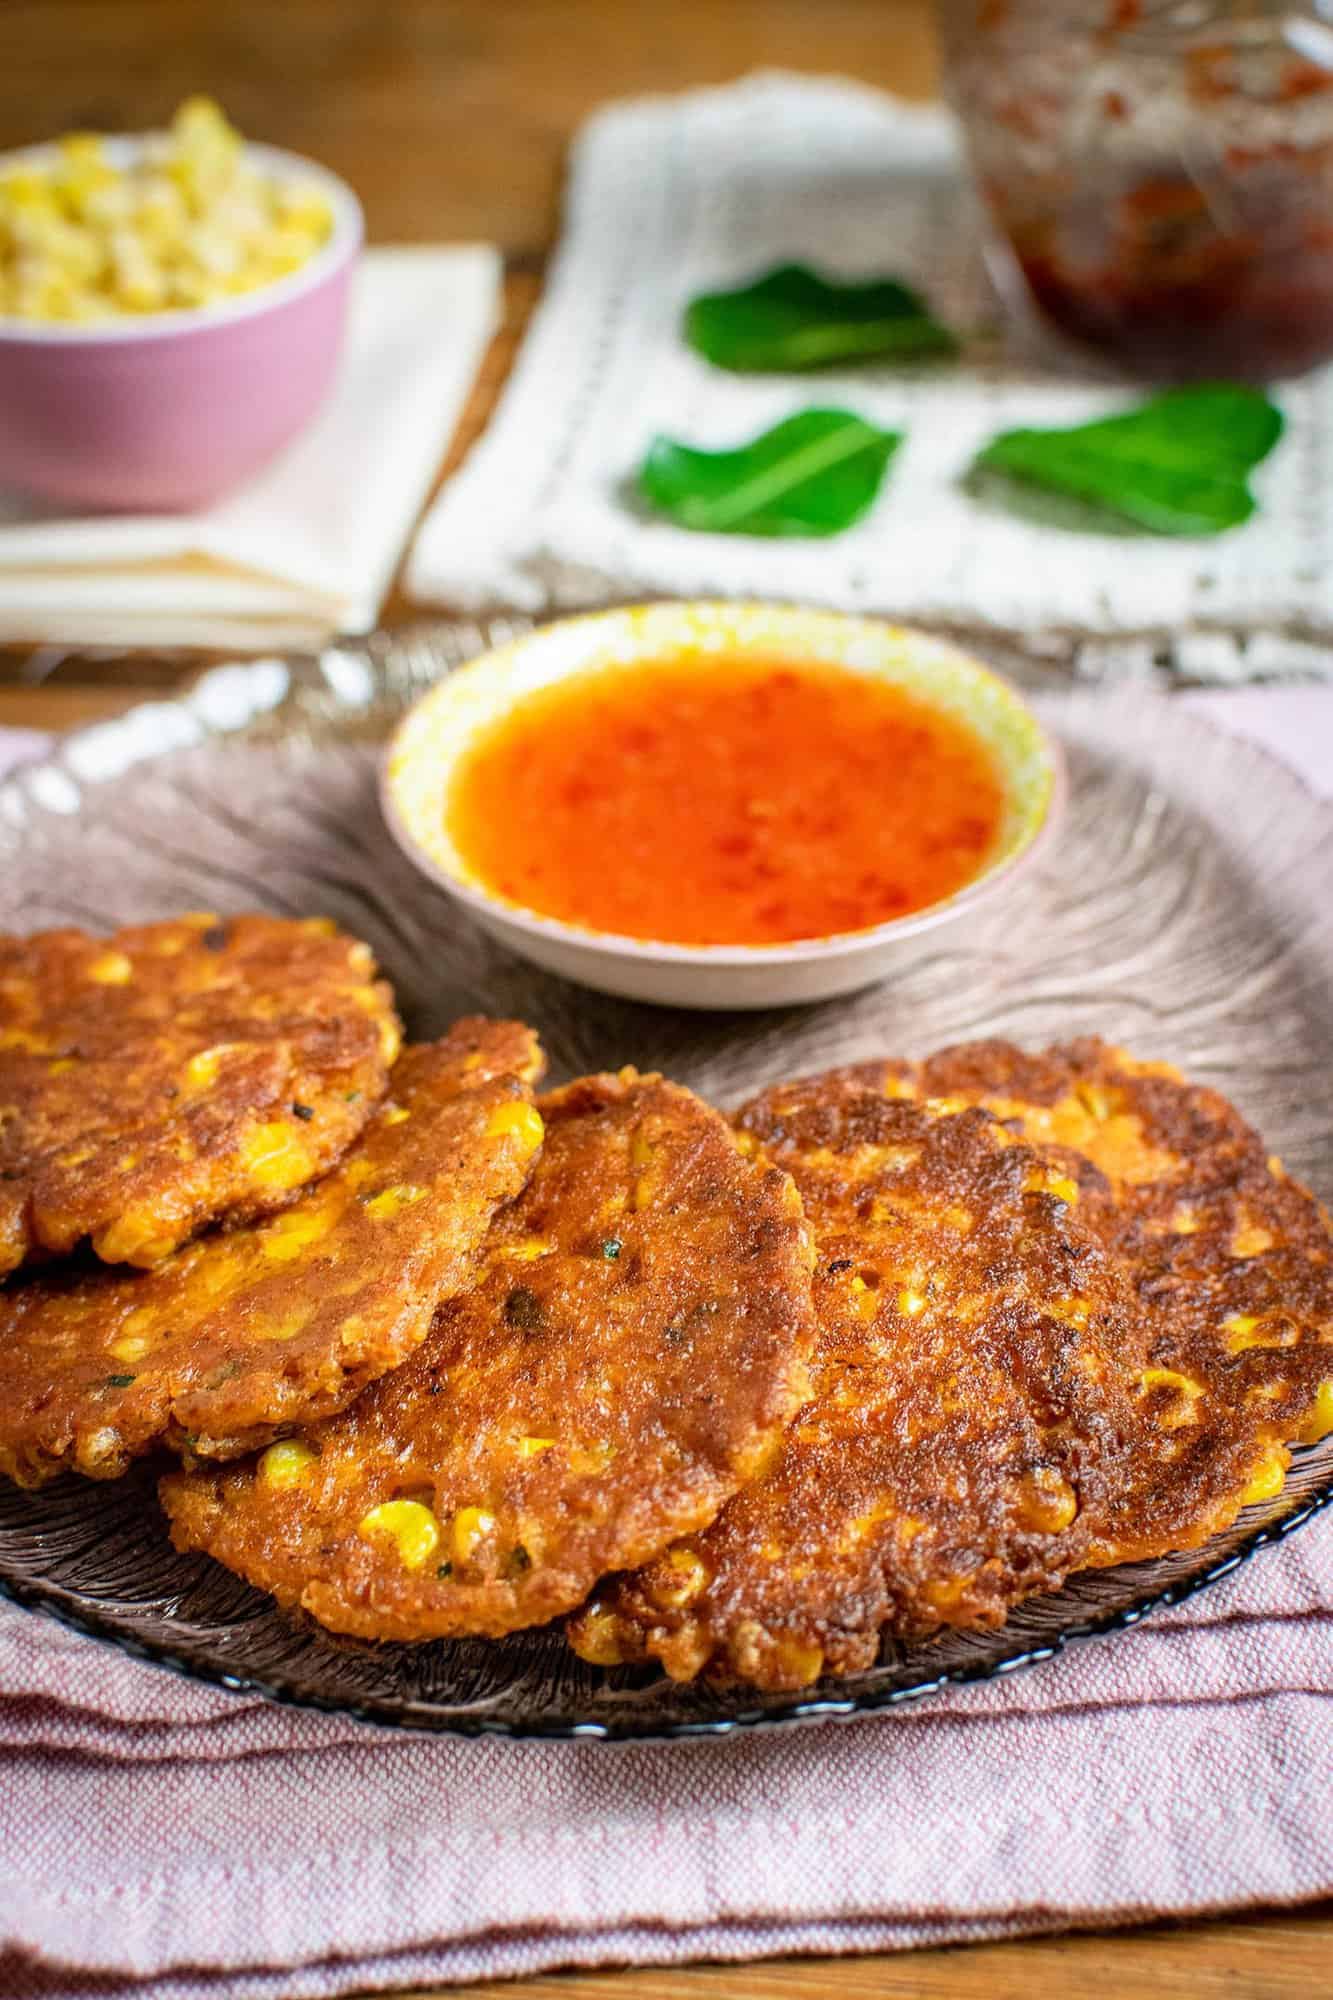 Thai sweetcorn fritters on a grey see-through plate with sweet chilli sauce in the background and a pot of sweetcorn and kaffir lime leaves for decoration.